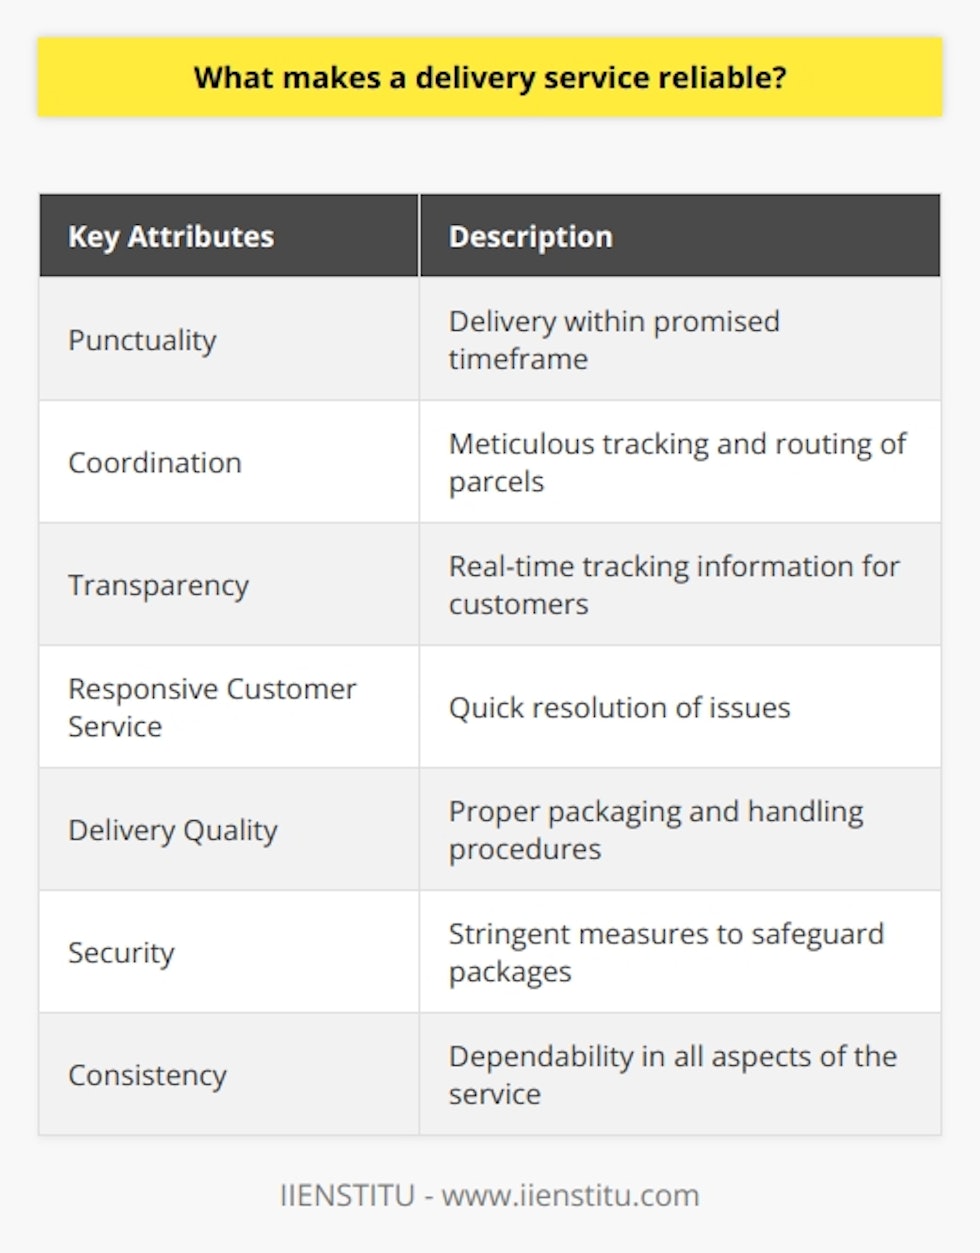 Characteristics of a Reliable Delivery ServiceWhen it comes to choosing a delivery service, reliability is crucial. Customers want to be assured that their packages will arrive on time and in good condition. While many delivery services claim to be reliable, there are certain key attributes that truly set apart those that live up to their promises. In this article, we will explore these characteristics in detail.Punctuality is perhaps the most important attribute of a reliable delivery service. Customers expect their packages to be delivered within the promised timeframe. Whether it's a same-day delivery or a standard shipping option, reliable services prioritize punctuality to maintain customer trust and satisfaction. Consistently meeting delivery deadlines not only keeps customers happy but also establishes the reputation of the service as reliable and trustworthy.Coordination is another essential aspect of a reliable delivery service. Efficient system management ensures that customers receive the correct parcels. Mixing up orders can erode faith in the service and lead to customer dissatisfaction. Therefore, reliable services prioritize meticulous tracking and routing of parcels to ensure that the right package reaches the right customer at the right time.Transparency is also key to the reliability of a delivery service. Customers value accurate tracking information about their shipments. The ability to track a parcel in real-time enhances the overall reliability of the service. It provides customers with peace of mind as they can stay informed about the progress of their delivery and anticipate its arrival.Responsive customer service is another characteristic that underpins the reliability of a delivery service. No matter how efficient a service is, occasional problems may arise during the delivery process. It is how these issues are dealt with that can make or break the trust customers have in the service. A reliable delivery service ensures that its customer service team is quick to respond and resolves any issues in a timely manner. Promptly addressing customer concerns helps maintain their trust and satisfaction.While timeliness is crucial, the quality of delivery is equally important. A reliable delivery service takes extra care to ensure that the package arrives in top condition. Products damaged during transit reflect poorly on the reliability of the service. Therefore, reliable services invest in proper packaging and handling procedures to minimize the risk of damage and ensure the safe arrival of items.Security is yet another feature that contributes to the reliability of a delivery service. Customers need assurance that their purchases are held securely until they are delivered. Privacy protection is a priority, and reliable services implement stringent security measures to safeguard customer packages during transportation.Finally, consistency is a vital characteristic of a reliable delivery service. Dependability across all aspects of the service, every time, reinforces the reputation of reliability. Customers should be able to trust that the delivery service will consistently meet their expectations in terms of punctuality, coordination, transparency, customer service, delivery quality, and security.In conclusion, several factors contribute to creating a reliable delivery service. Punctuality, coordination, transparency, responsive customer service, delivery quality, security, and consistency are key attributes that enhance customer loyalty and trust. By prioritizing these characteristics, a delivery service can distinguish itself in the market and build a strong reputation for reliability.